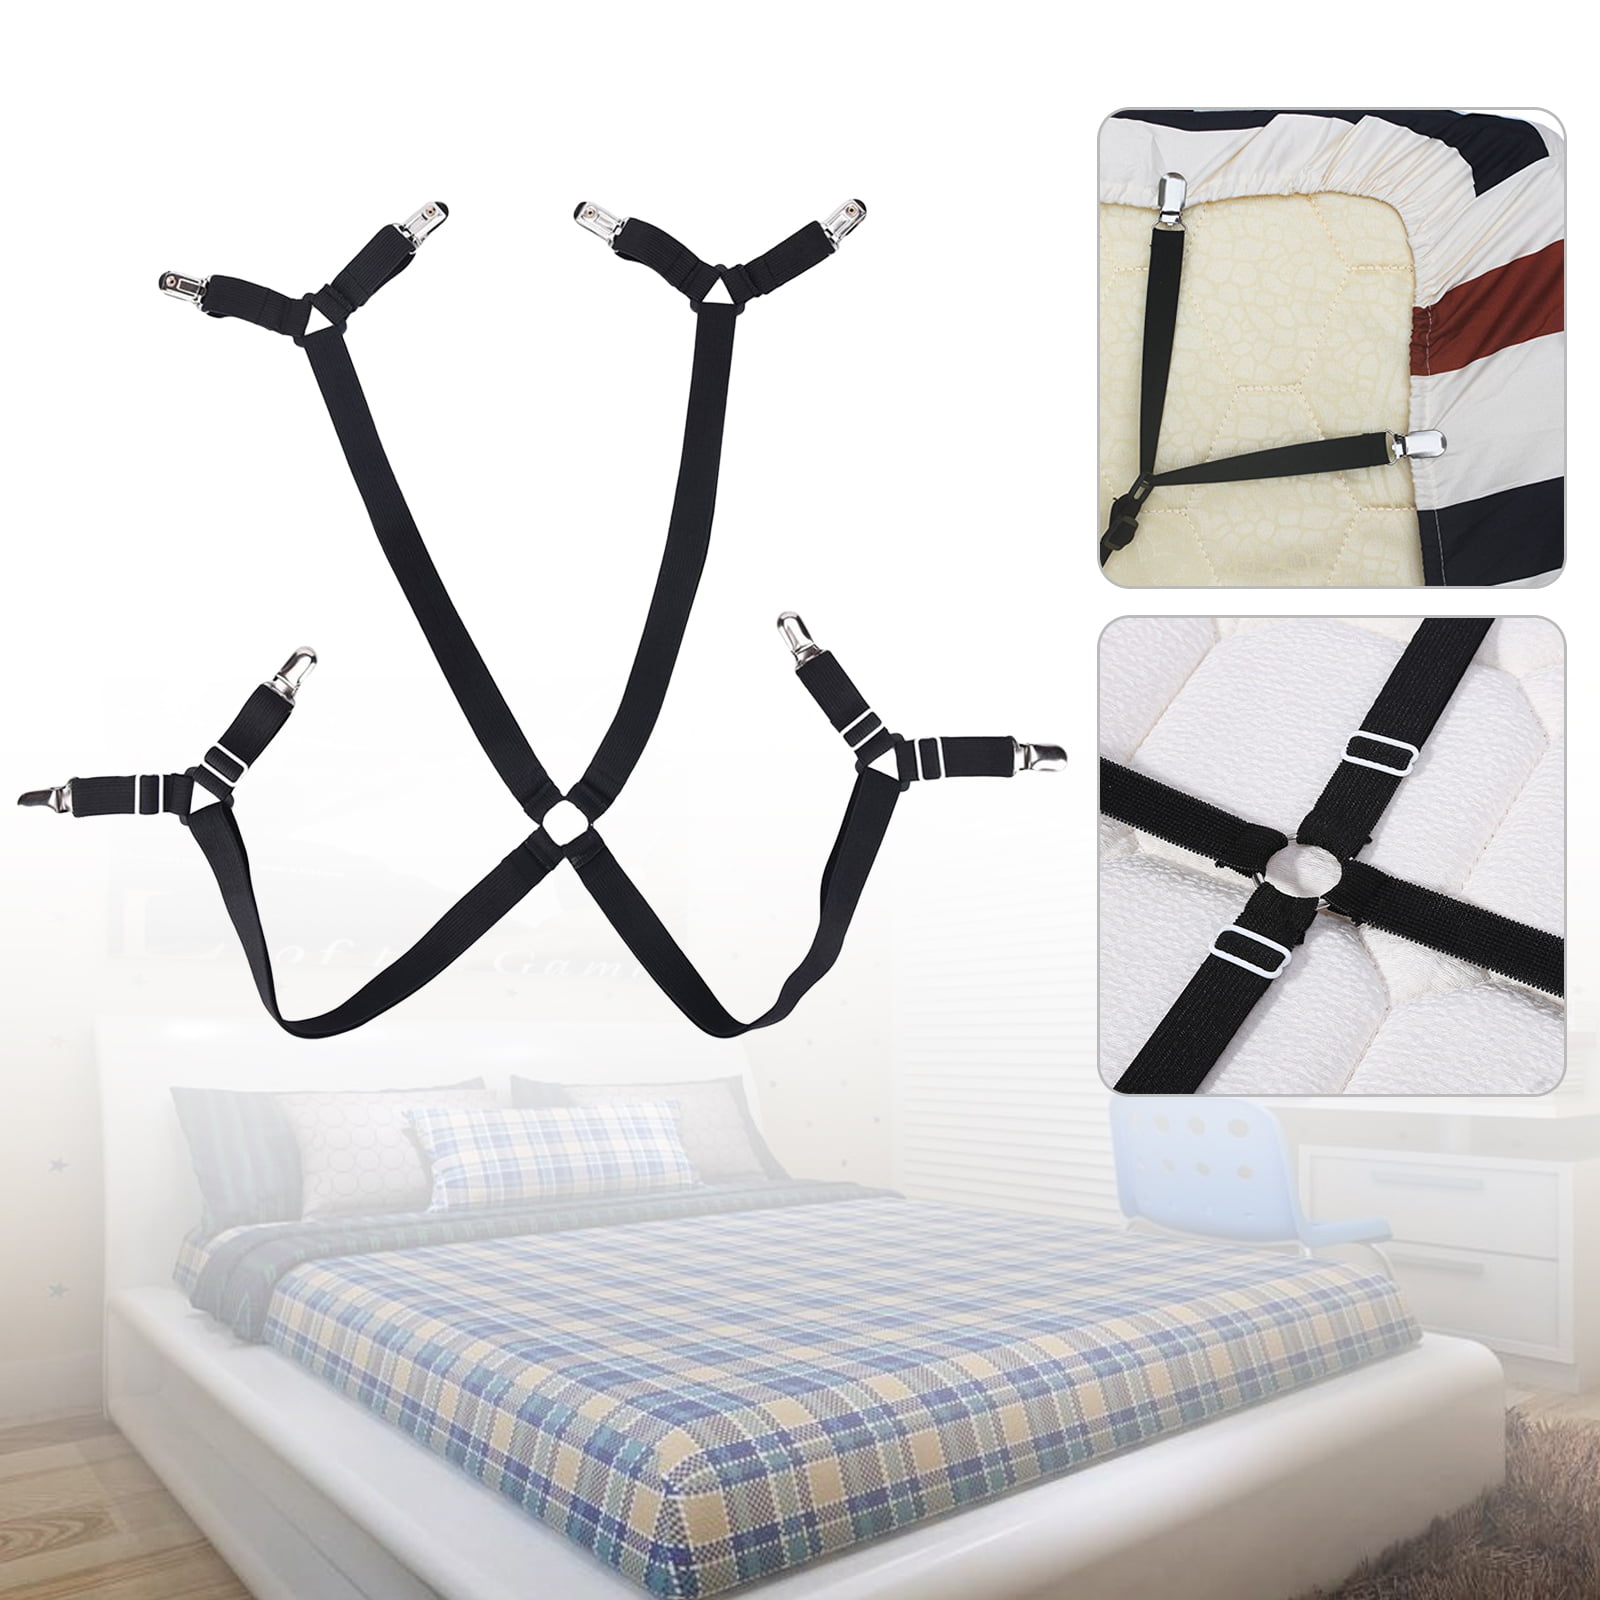 Clips 4PCS and Adjustable Bed Bands to Keep Sheets from Sliding Available in Twin and King Sizes Full Queen Sheet Straps with Heavy Duty Suspenders